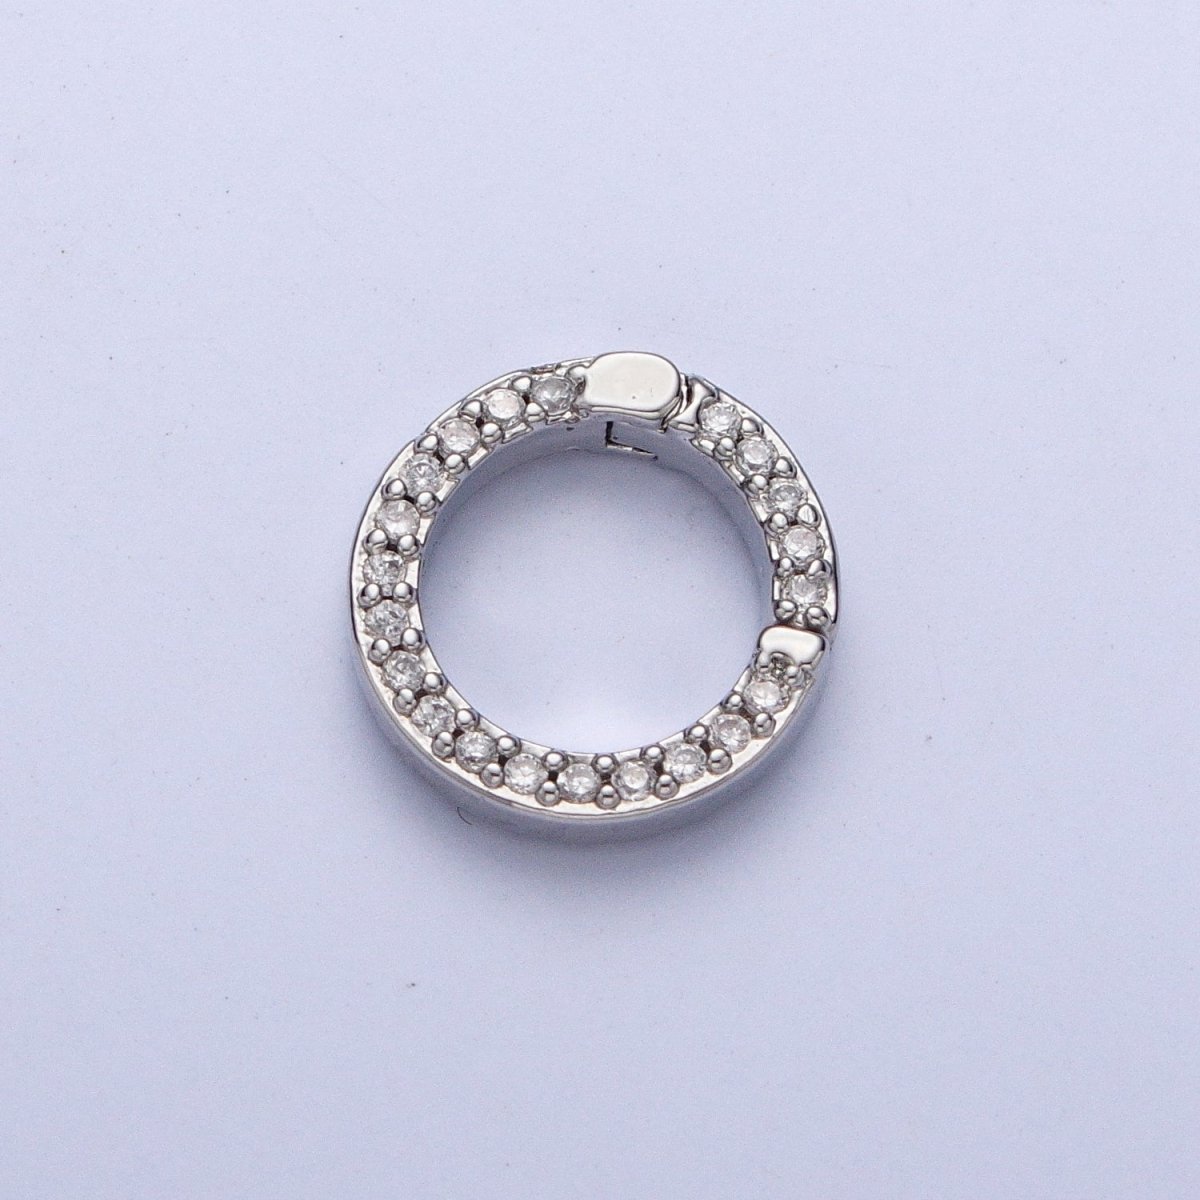 Push Gate Ring Gold Filled Micro Pave CZ 11mm Round Spring Gate Clasps For DIY Jewelry Charm Holder in Gold, Silver, Rose Gold, Black L-862 L-863 L-864 L-865 - DLUXCA